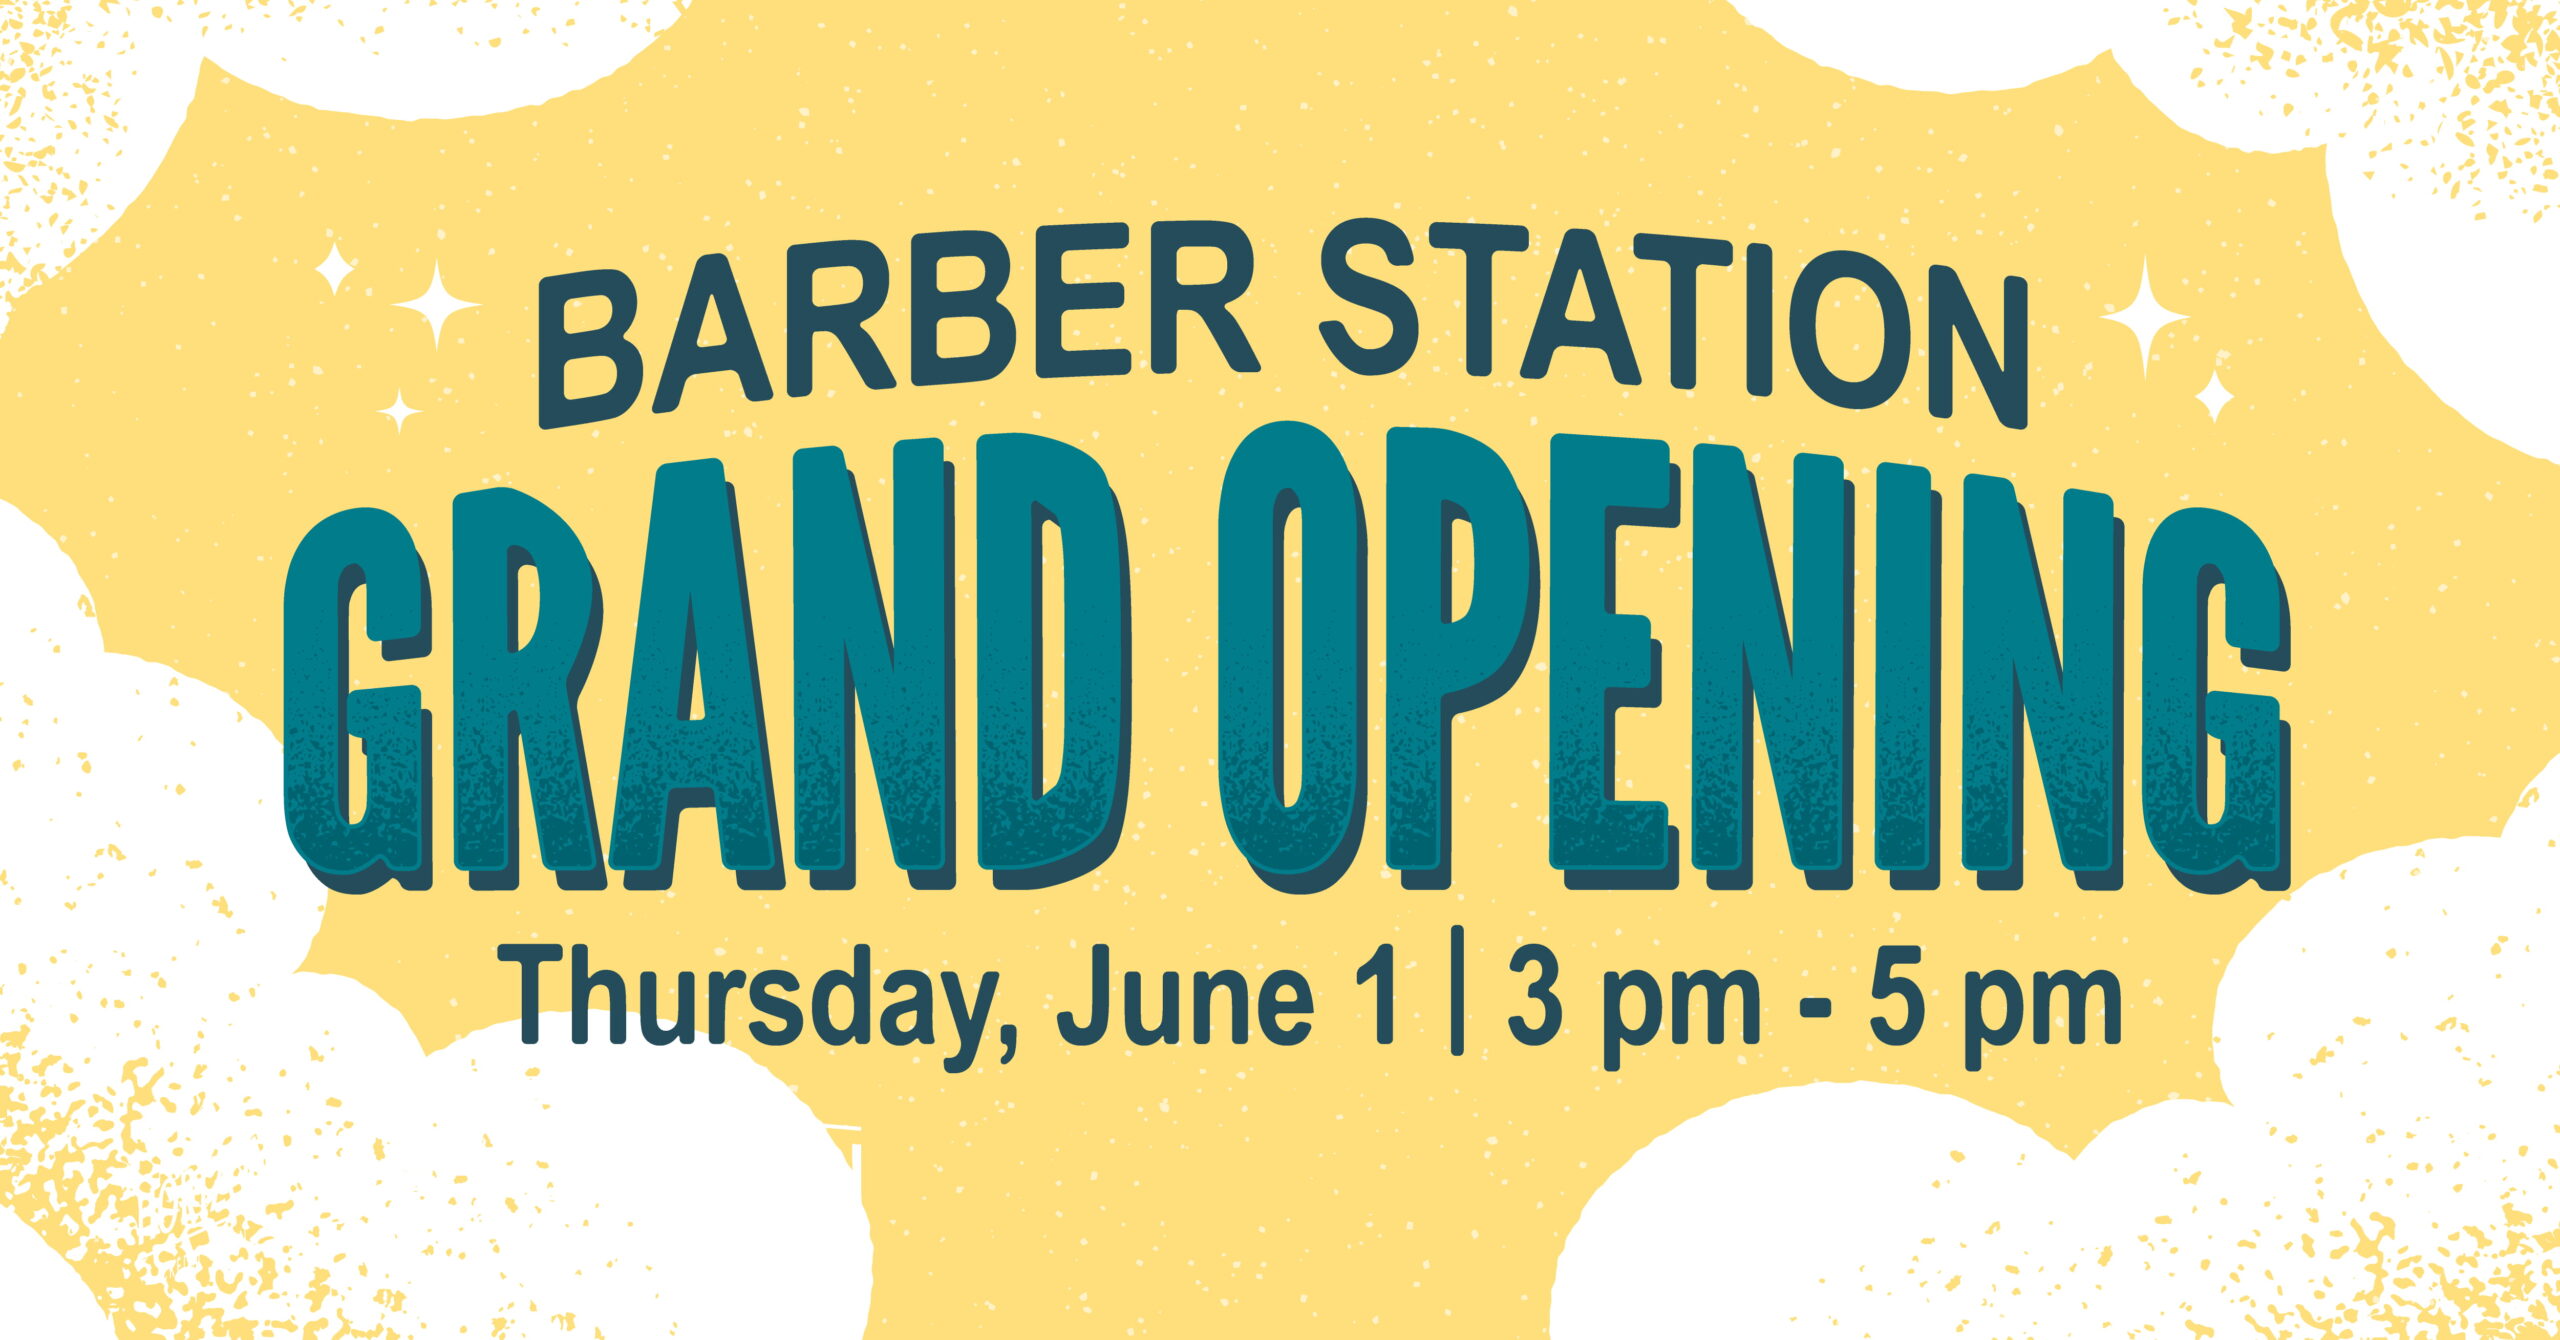 Barber Station Grand Opening